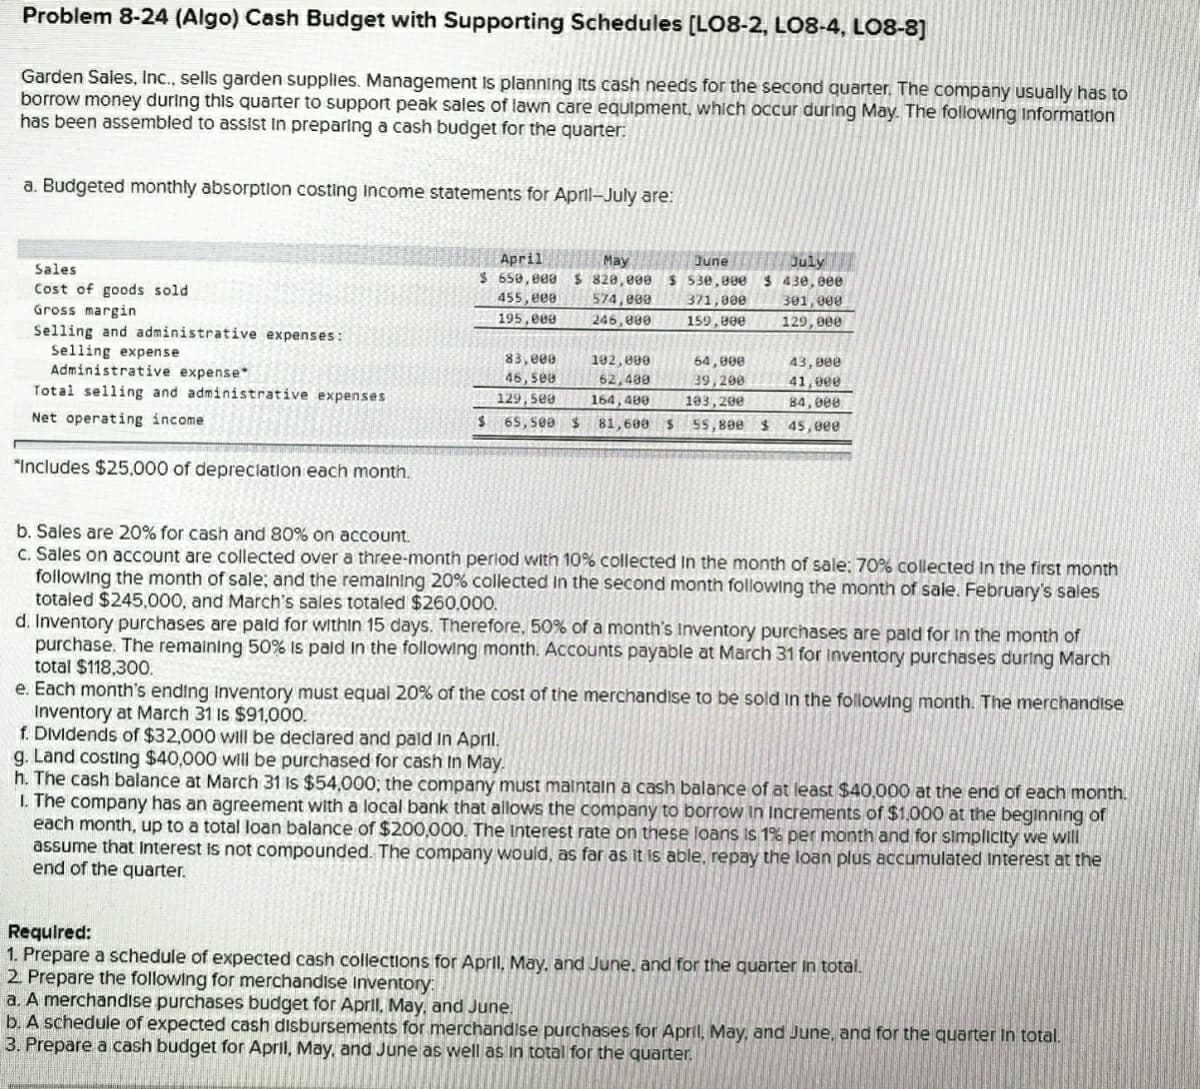 Problem 8-24 (Algo) Cash Budget with Supporting Schedules [LO8-2, LO8-4, LO8-8]
Garden Sales, Ic., sells garden supplies. Management Is planning Its cash needs for the second quarter. The company usually has to
borrow money during this quarter to support peak sales of lawn care equipment, which occur during May. The following Information
has been assembled to assist in preparing a cash budget for the quarter:
a. Budgeted monthly absorption costing Income statements for April-July are:
April
$ 650, 009 $ 820,000
455, ee0
195,008
July
$ 430, eee
May
June
Sales
$ 530,000
Cost of goods sold
Gross margin
Selling and administrative expenses:
Selling expense
Administrative expense*
Total selling and administrative expenses
574, e09
371,800
301,000
246, 000
159,000
129, 000
83,e00
46, sea
129,500
64, 000
102, 800
62,489
164, 480
$ 65, se0 $ 81,600 S 55,800 $
43, 000
39,200
193, 20e 84, 000
41,000
Net operating income
45,eee
"Includes $25,000 of depreclation each month.
b. Sales are 20% for cash and 80% on account.
C. Sales on account are collected over a three-month period with 10% collected In the month of sale; 70% collected In the first month
following the month of sale; and the remalning 20% collected In the second month following the month of sale. February's sales
totaled $245,000, and March's sales totaled $260,000.
d. Inventory purchases are pald for within 15 days. Therefore, 50% of a month's inventory purchases are pald for In the month of
purchase. The remaining 50% Is pald in the following month. Accounts payable at March 31 for Inventory purchases during March
total $118,300.
e. Each month's ending Inventory must equal 20% of the cost of the merchandise to be sold in the following month. The merchandise
Inventory at March 31 Is $91,000.
f. Dividends of $32,000 will be declared and pald In Aprtl.
g. Land costing $40,000 will be purchased for cash In May.
h. The cash balance at March 31 Is $54,000; the company must malntaln a cash balance of at least $40,000 at the end of each month.
I. The company has an agreement with a local bank that allows the company to borow In Increments of $1,000 at the beginning of
each month, up to a total loan balance of $200,000. The Interest rate on these loans is 1% per month and for simplicity we will
assume that Interest Is not compounded. The company would, as far as It is able, repay the loan plus accumulated Interest at the
end of the quarter.
Required:
1. Prepare a schedule of expected cash collections for April, May, and June, and for the quarter In total.
2 Prepare the following for merchandise Inventory:
a. A merchandise purchases budget for April, May, and June.
b. A schedule of expected cash disbursements for merchandise purchases for April, May, and June, and for the quarter In total.
3. Prepare a cash budget for April, May, and June as well as In total for the quarter.
